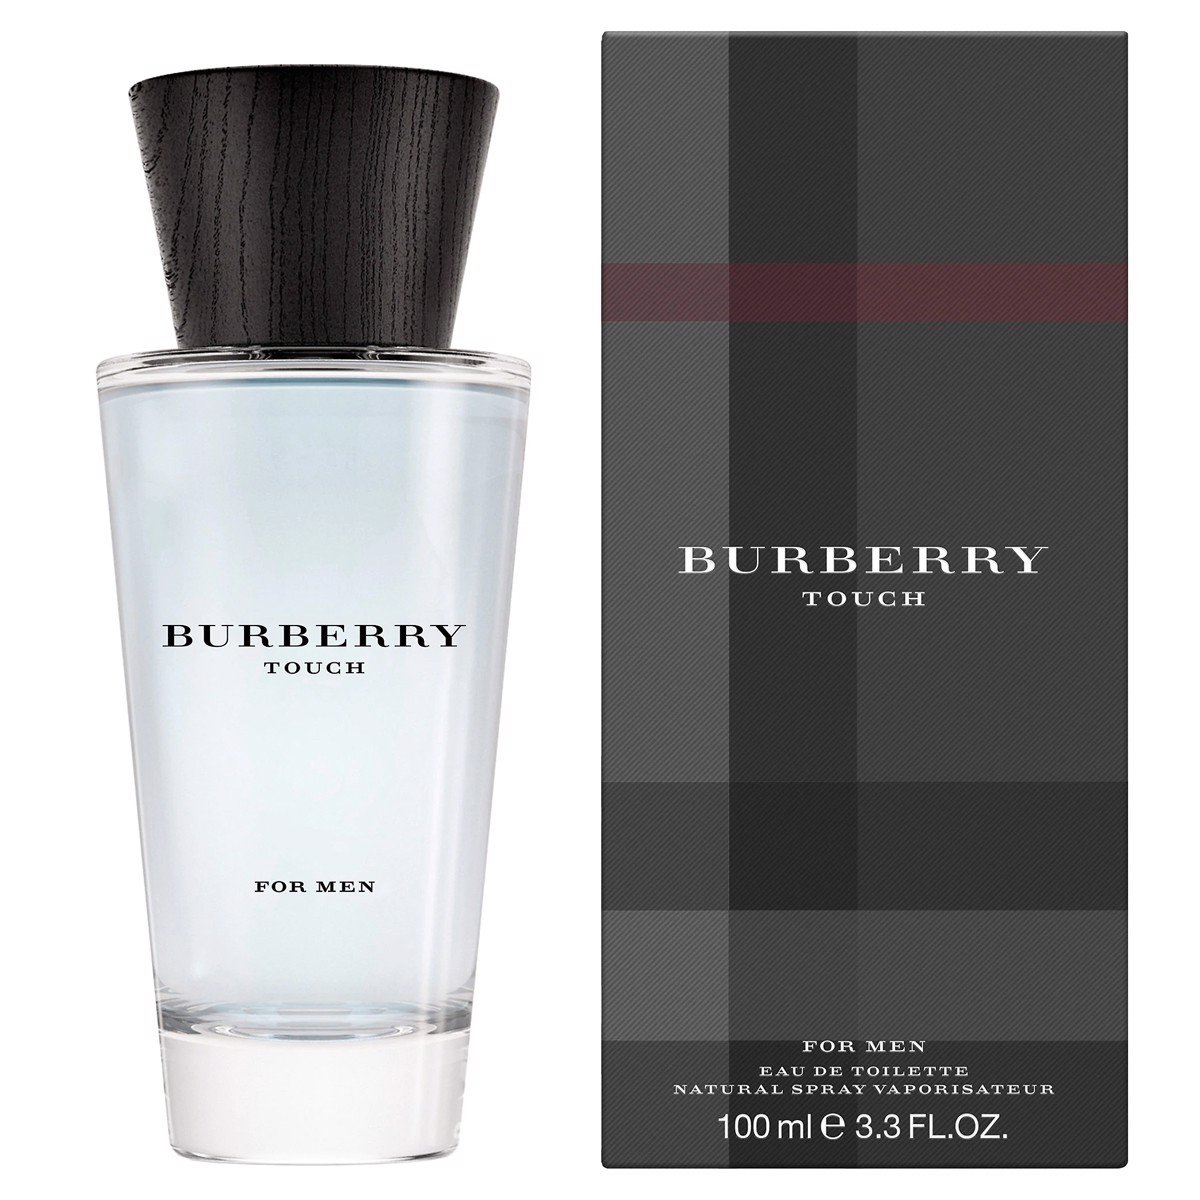 BURBERRY TOUCH FOR MEN 100ml